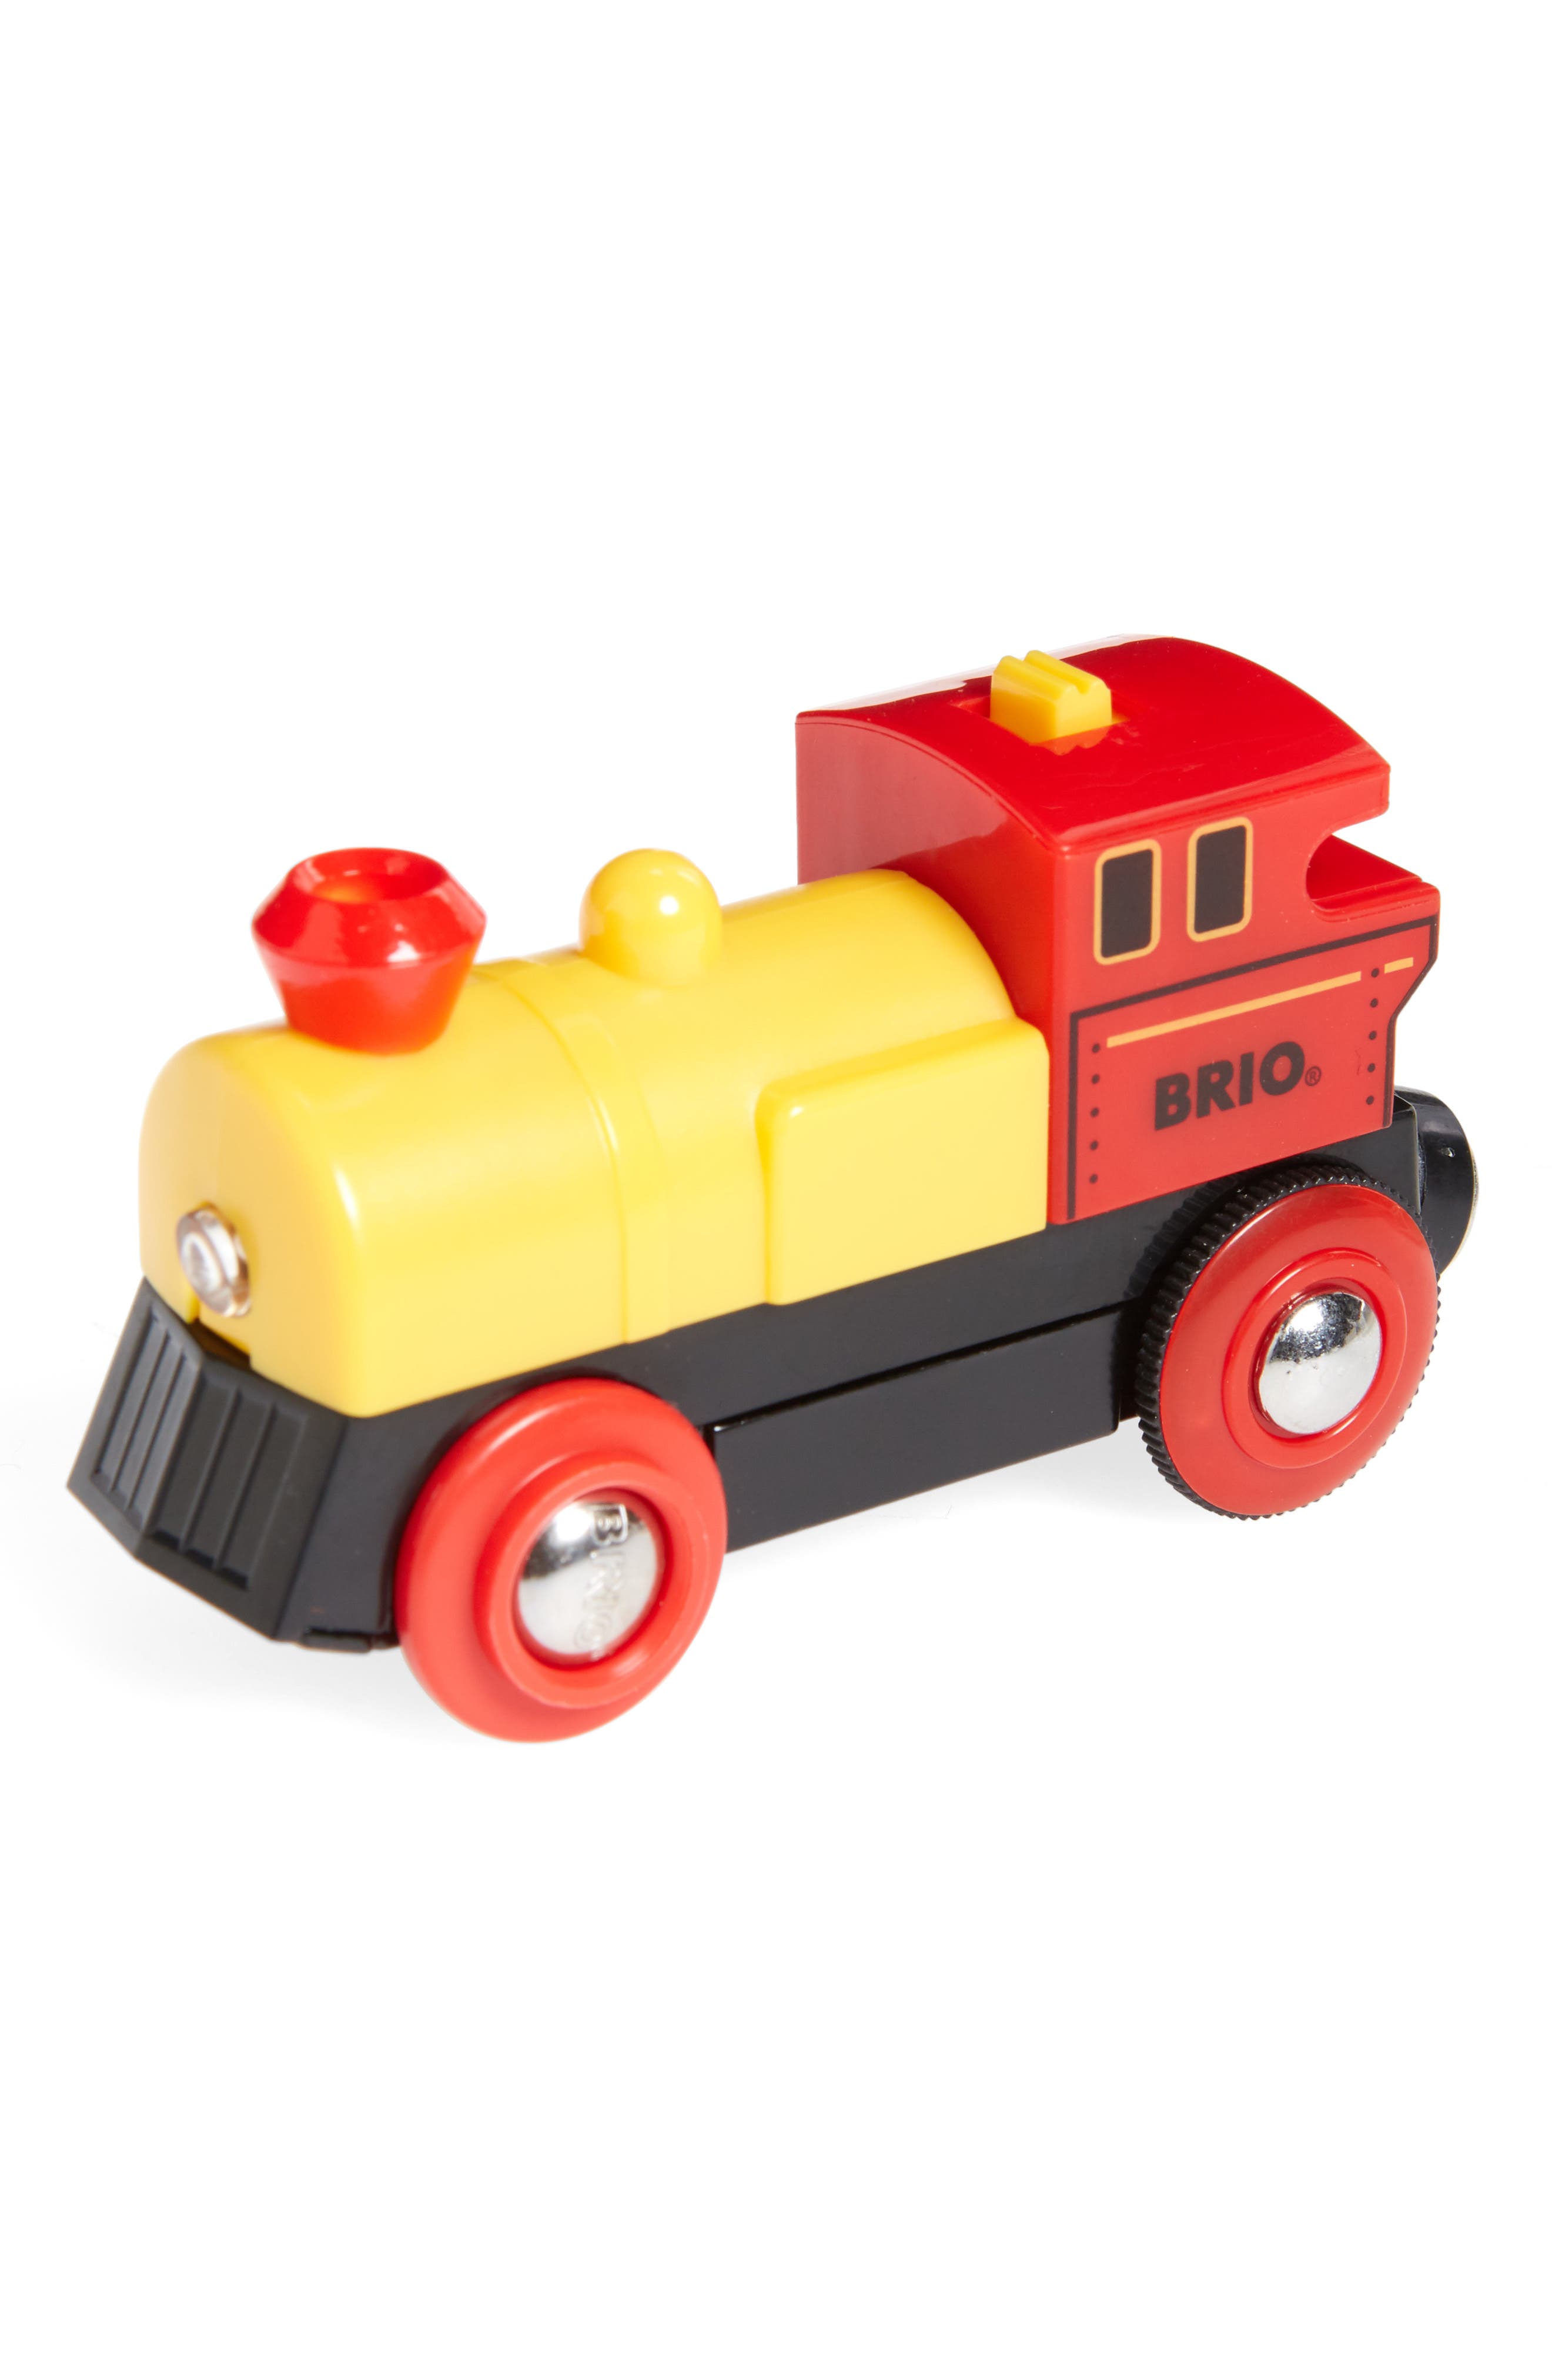 brio two way battery powered engine